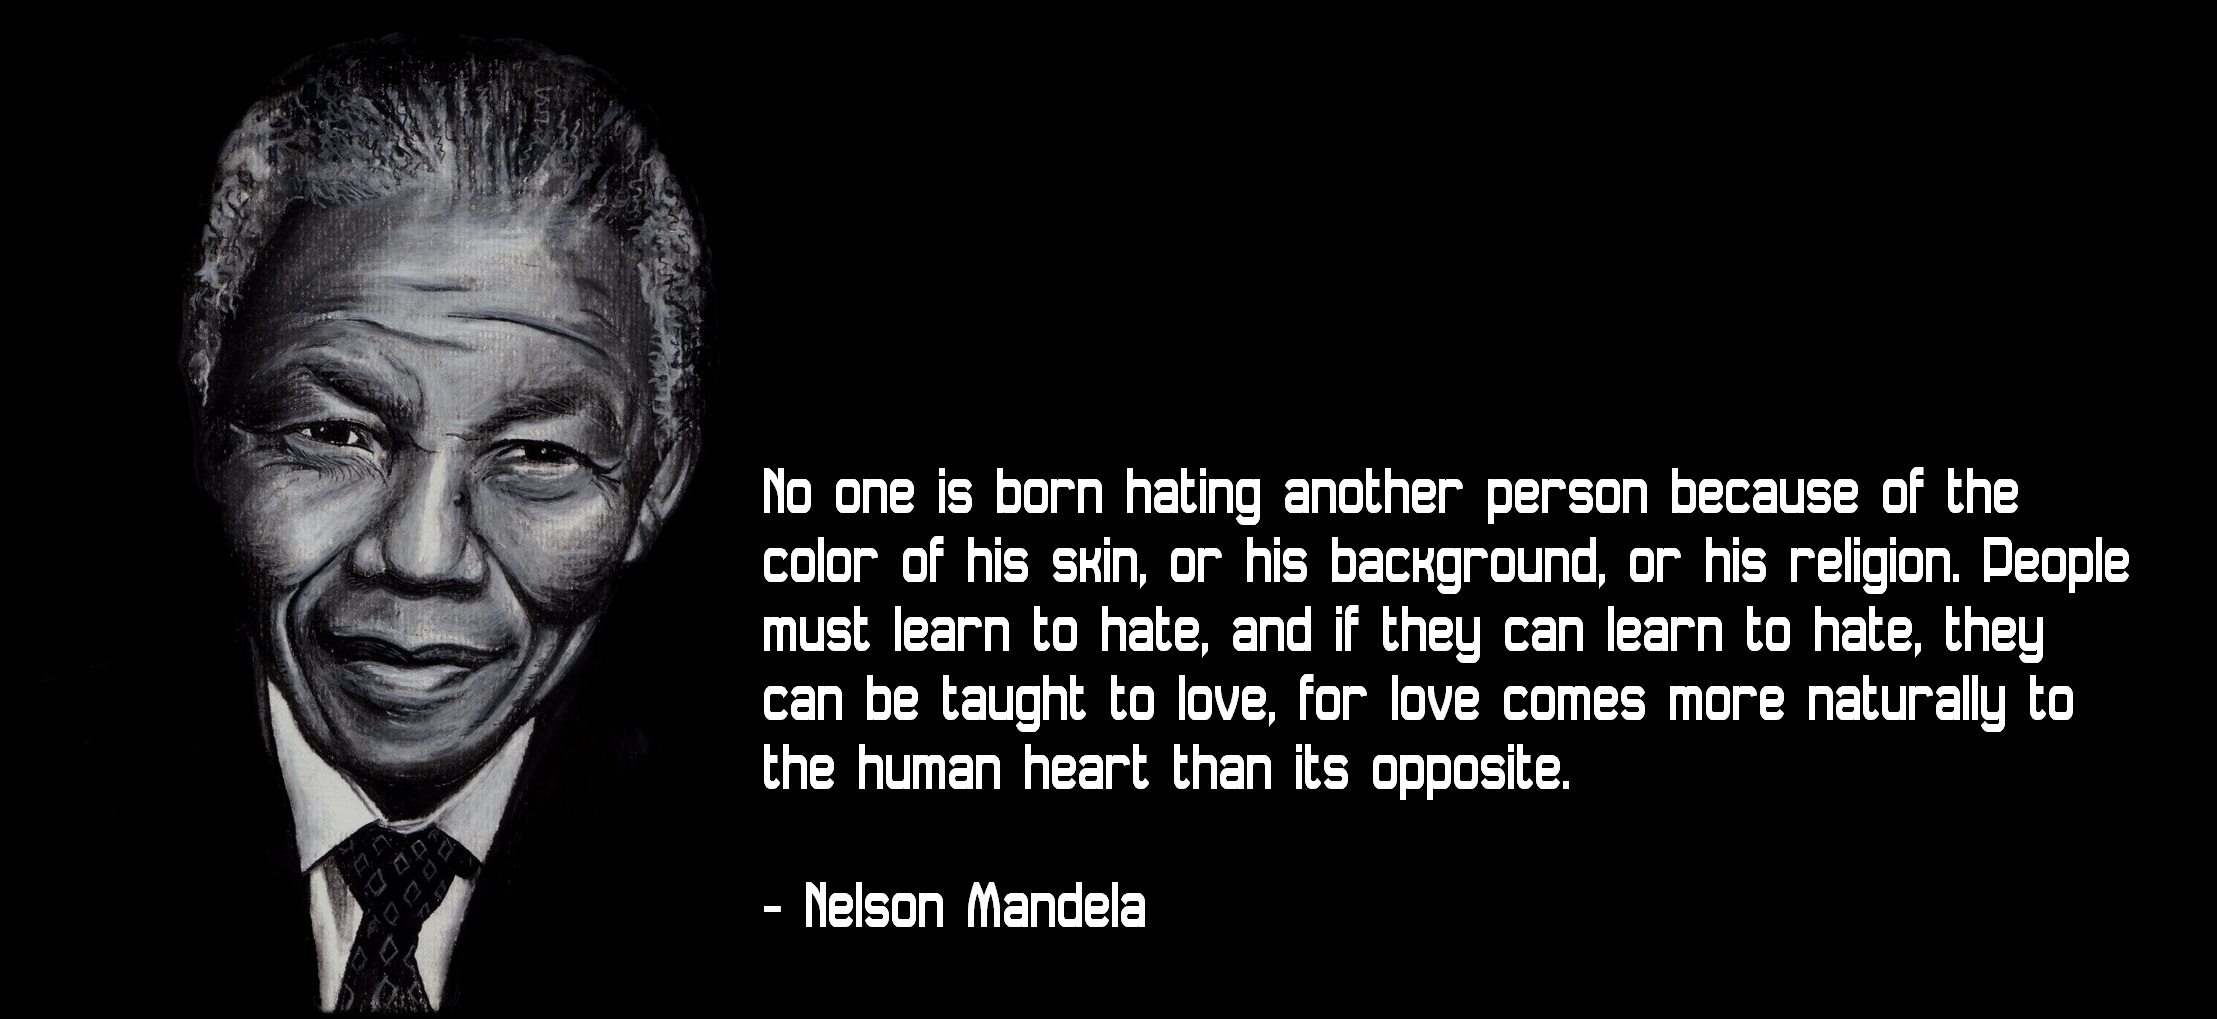 Inspirational HD Quote from Nelson Mandela